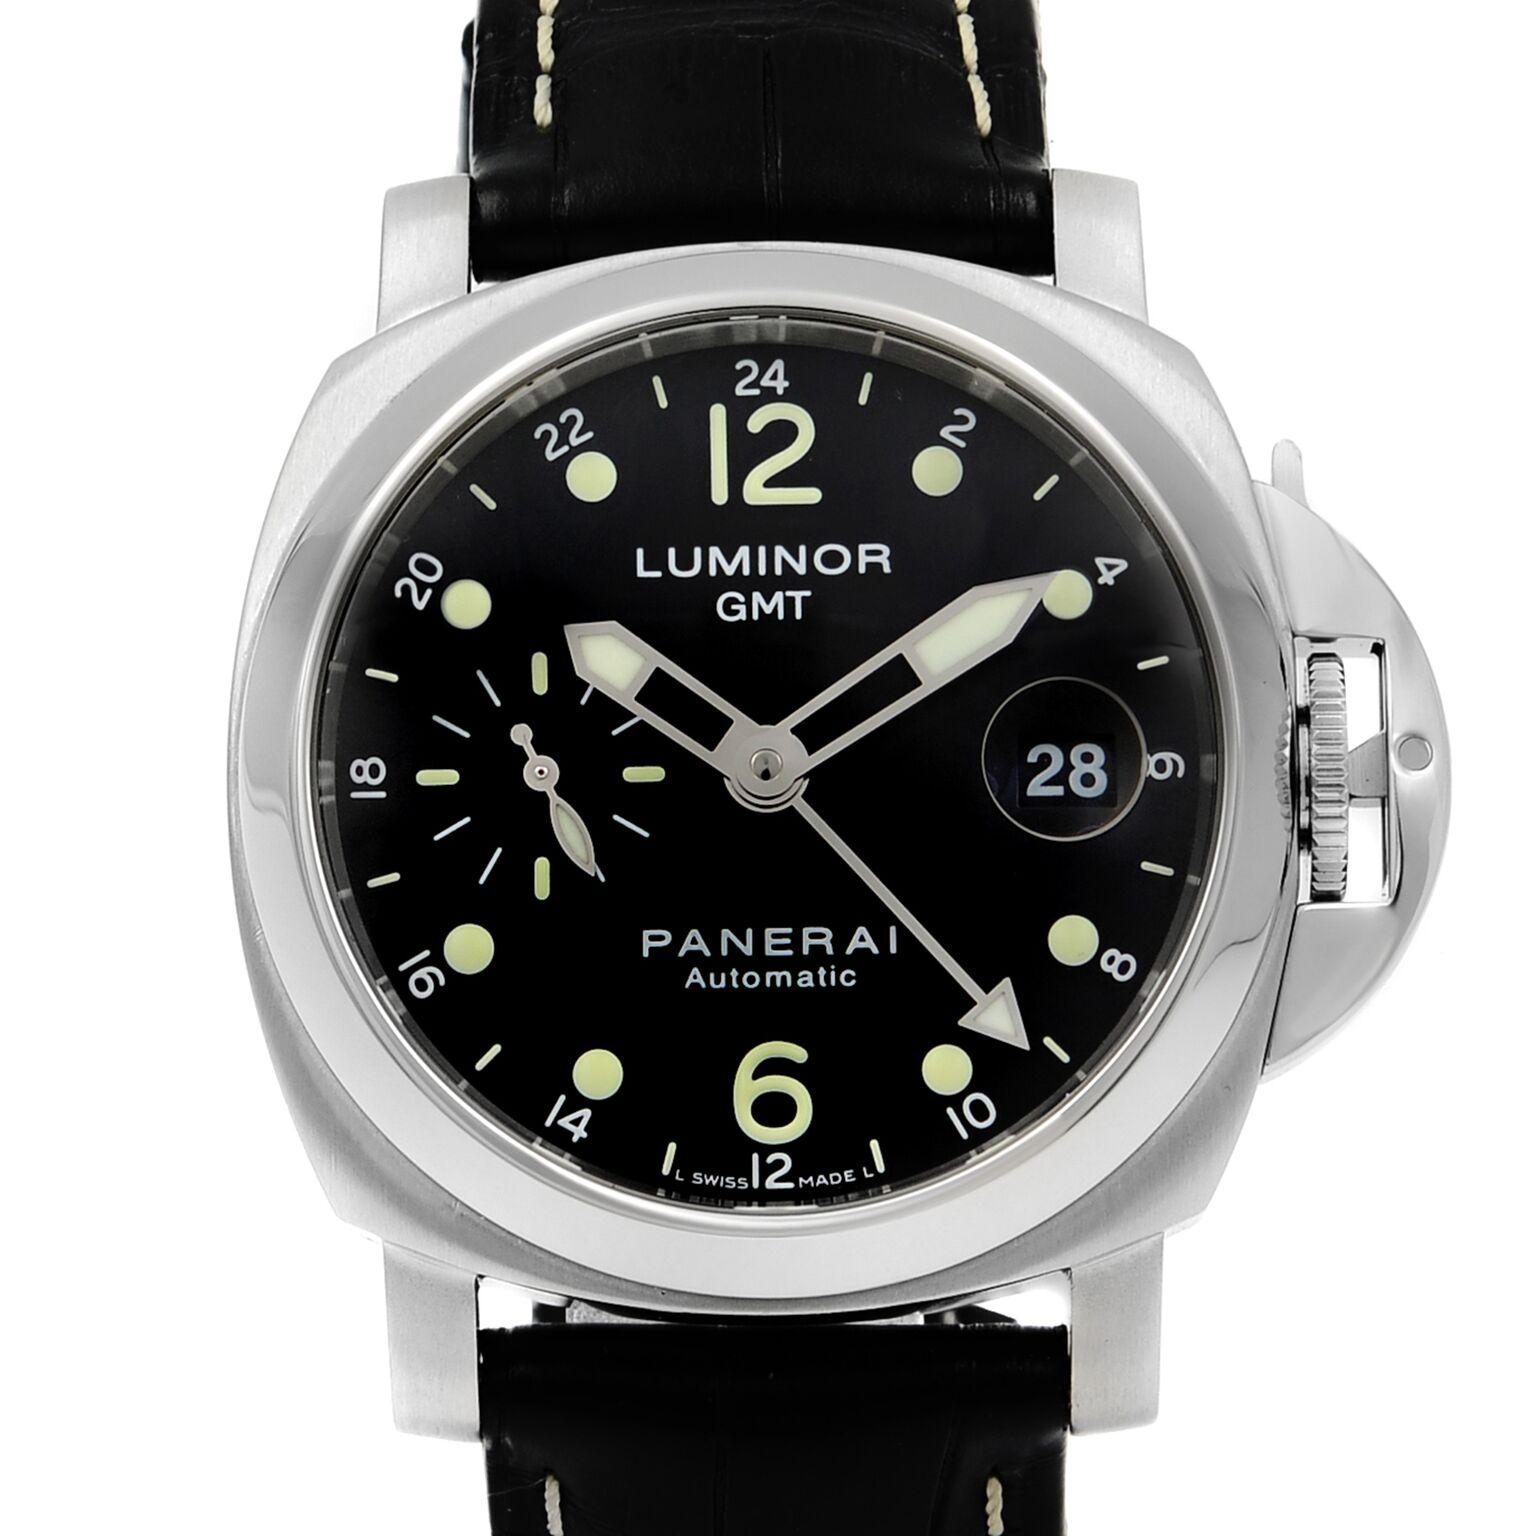 This pre-owned Panerai Luminor PAM00159 is a beautiful men's timepiece that is powered by mechanical (automatic) movement which is cased in a stainless steel case. It has a round shape face, gmt, date indicator, small seconds subdial dial and has